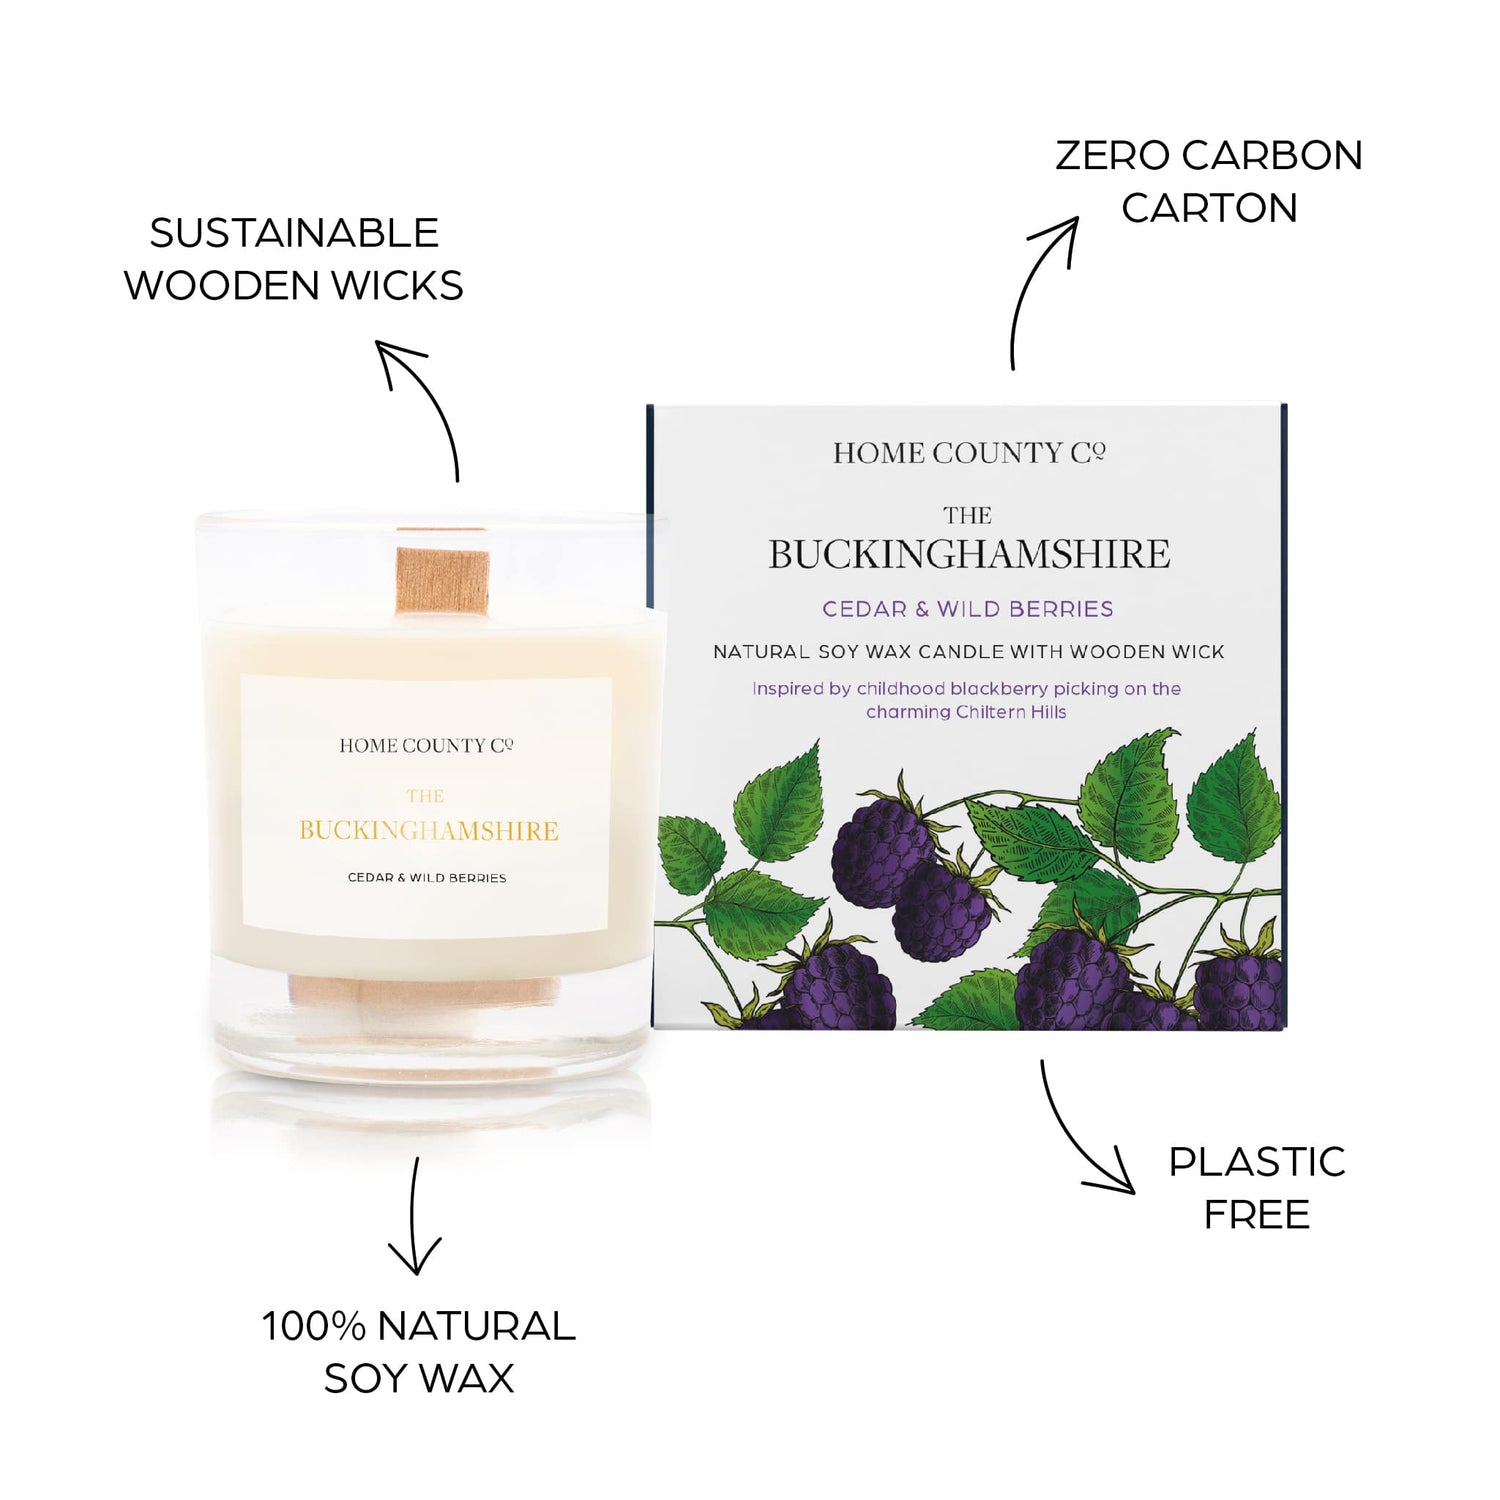 Sustainable candle credentials are shown around the berry scented candle image - sustainable wooden wicks, zero carbon carton, 100% natural soy wax, plastic free